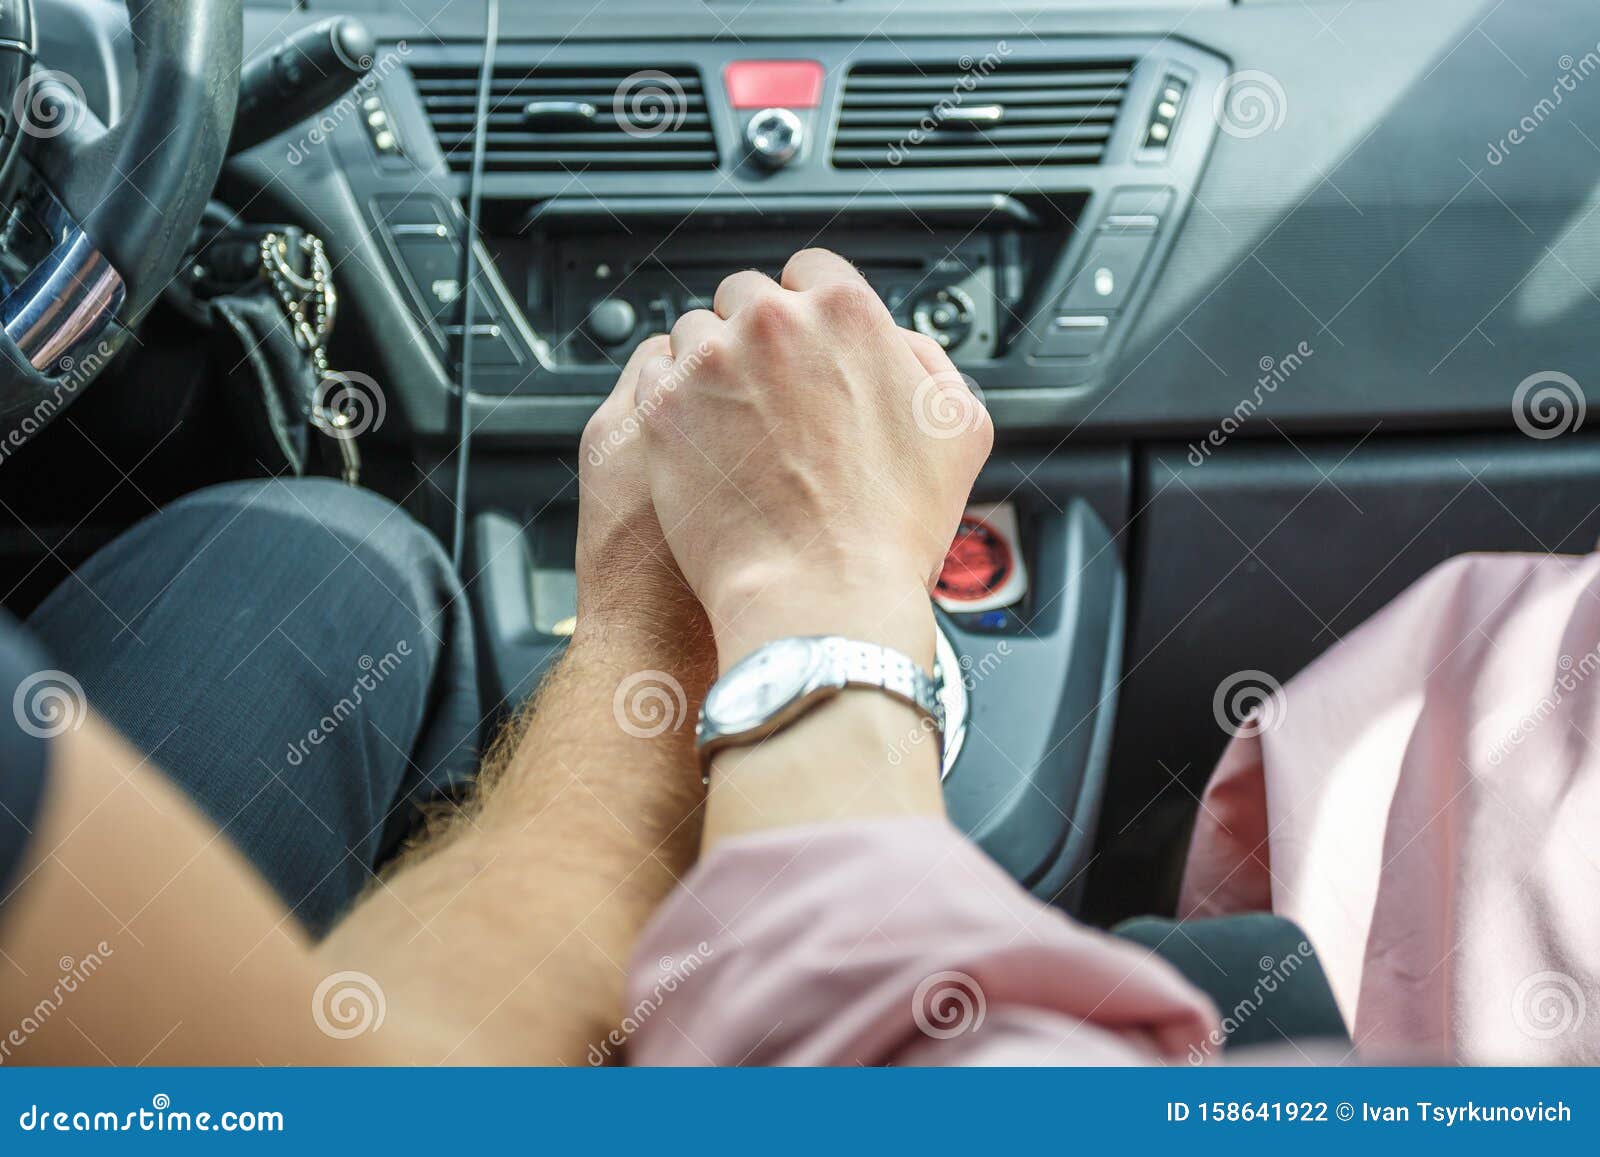 818 Couple Holding Hands Car Photos Free Royalty Free Stock Photos From Dreamstime